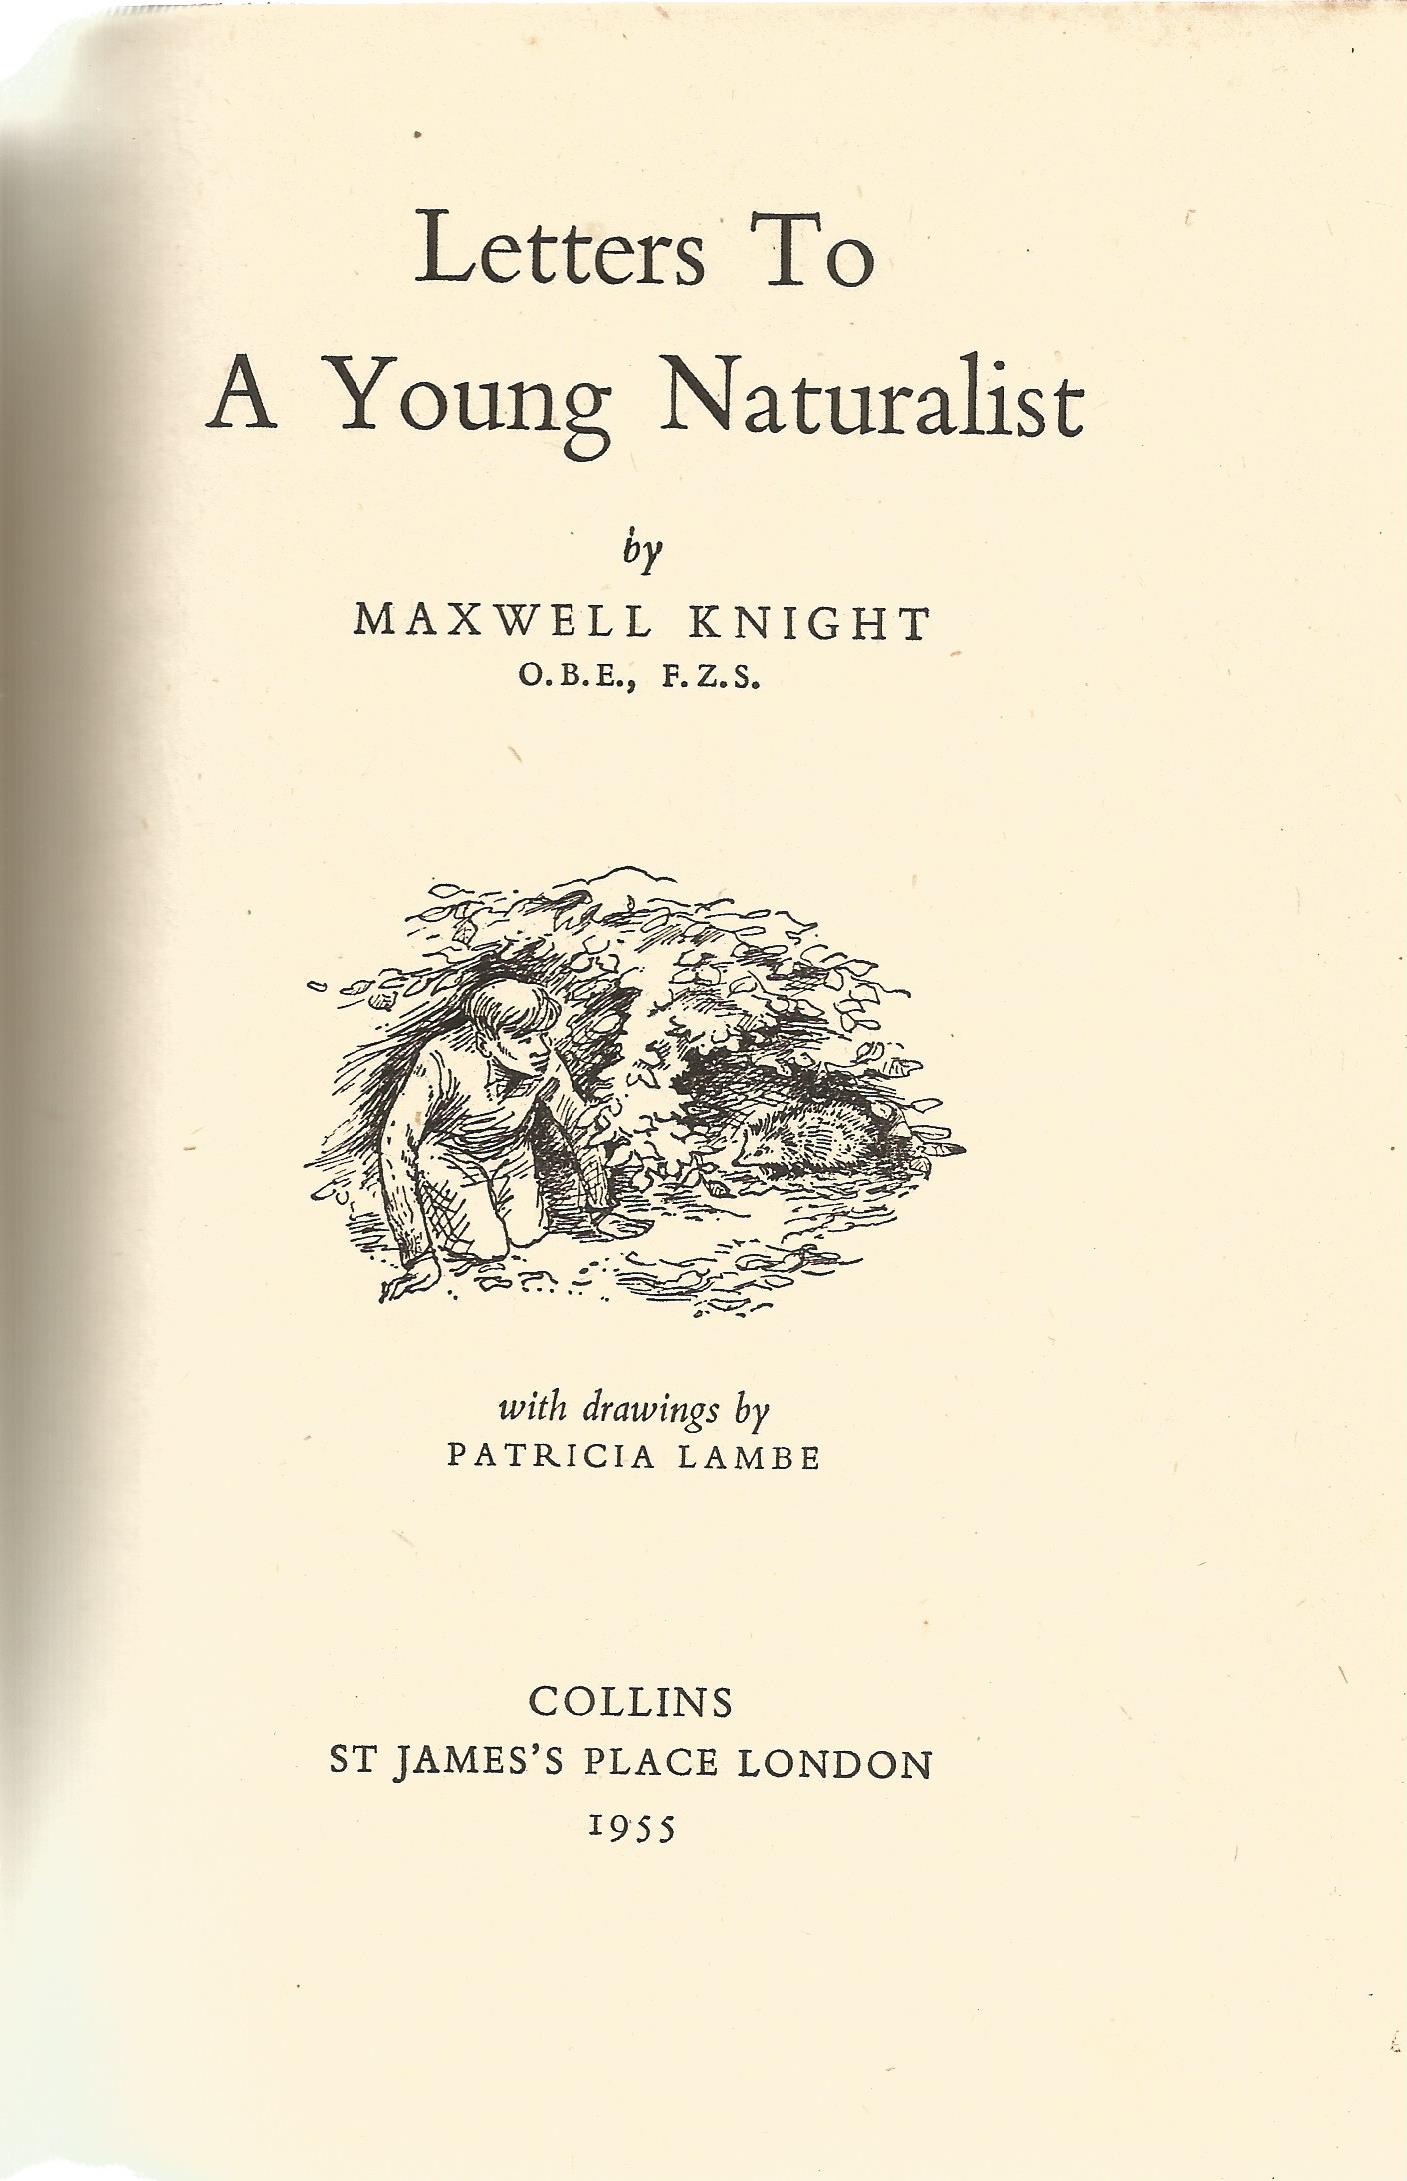 Letters to a Young Naturalist by Maxwell Knight Hardback Book 1955 First Edition published by - Image 2 of 2